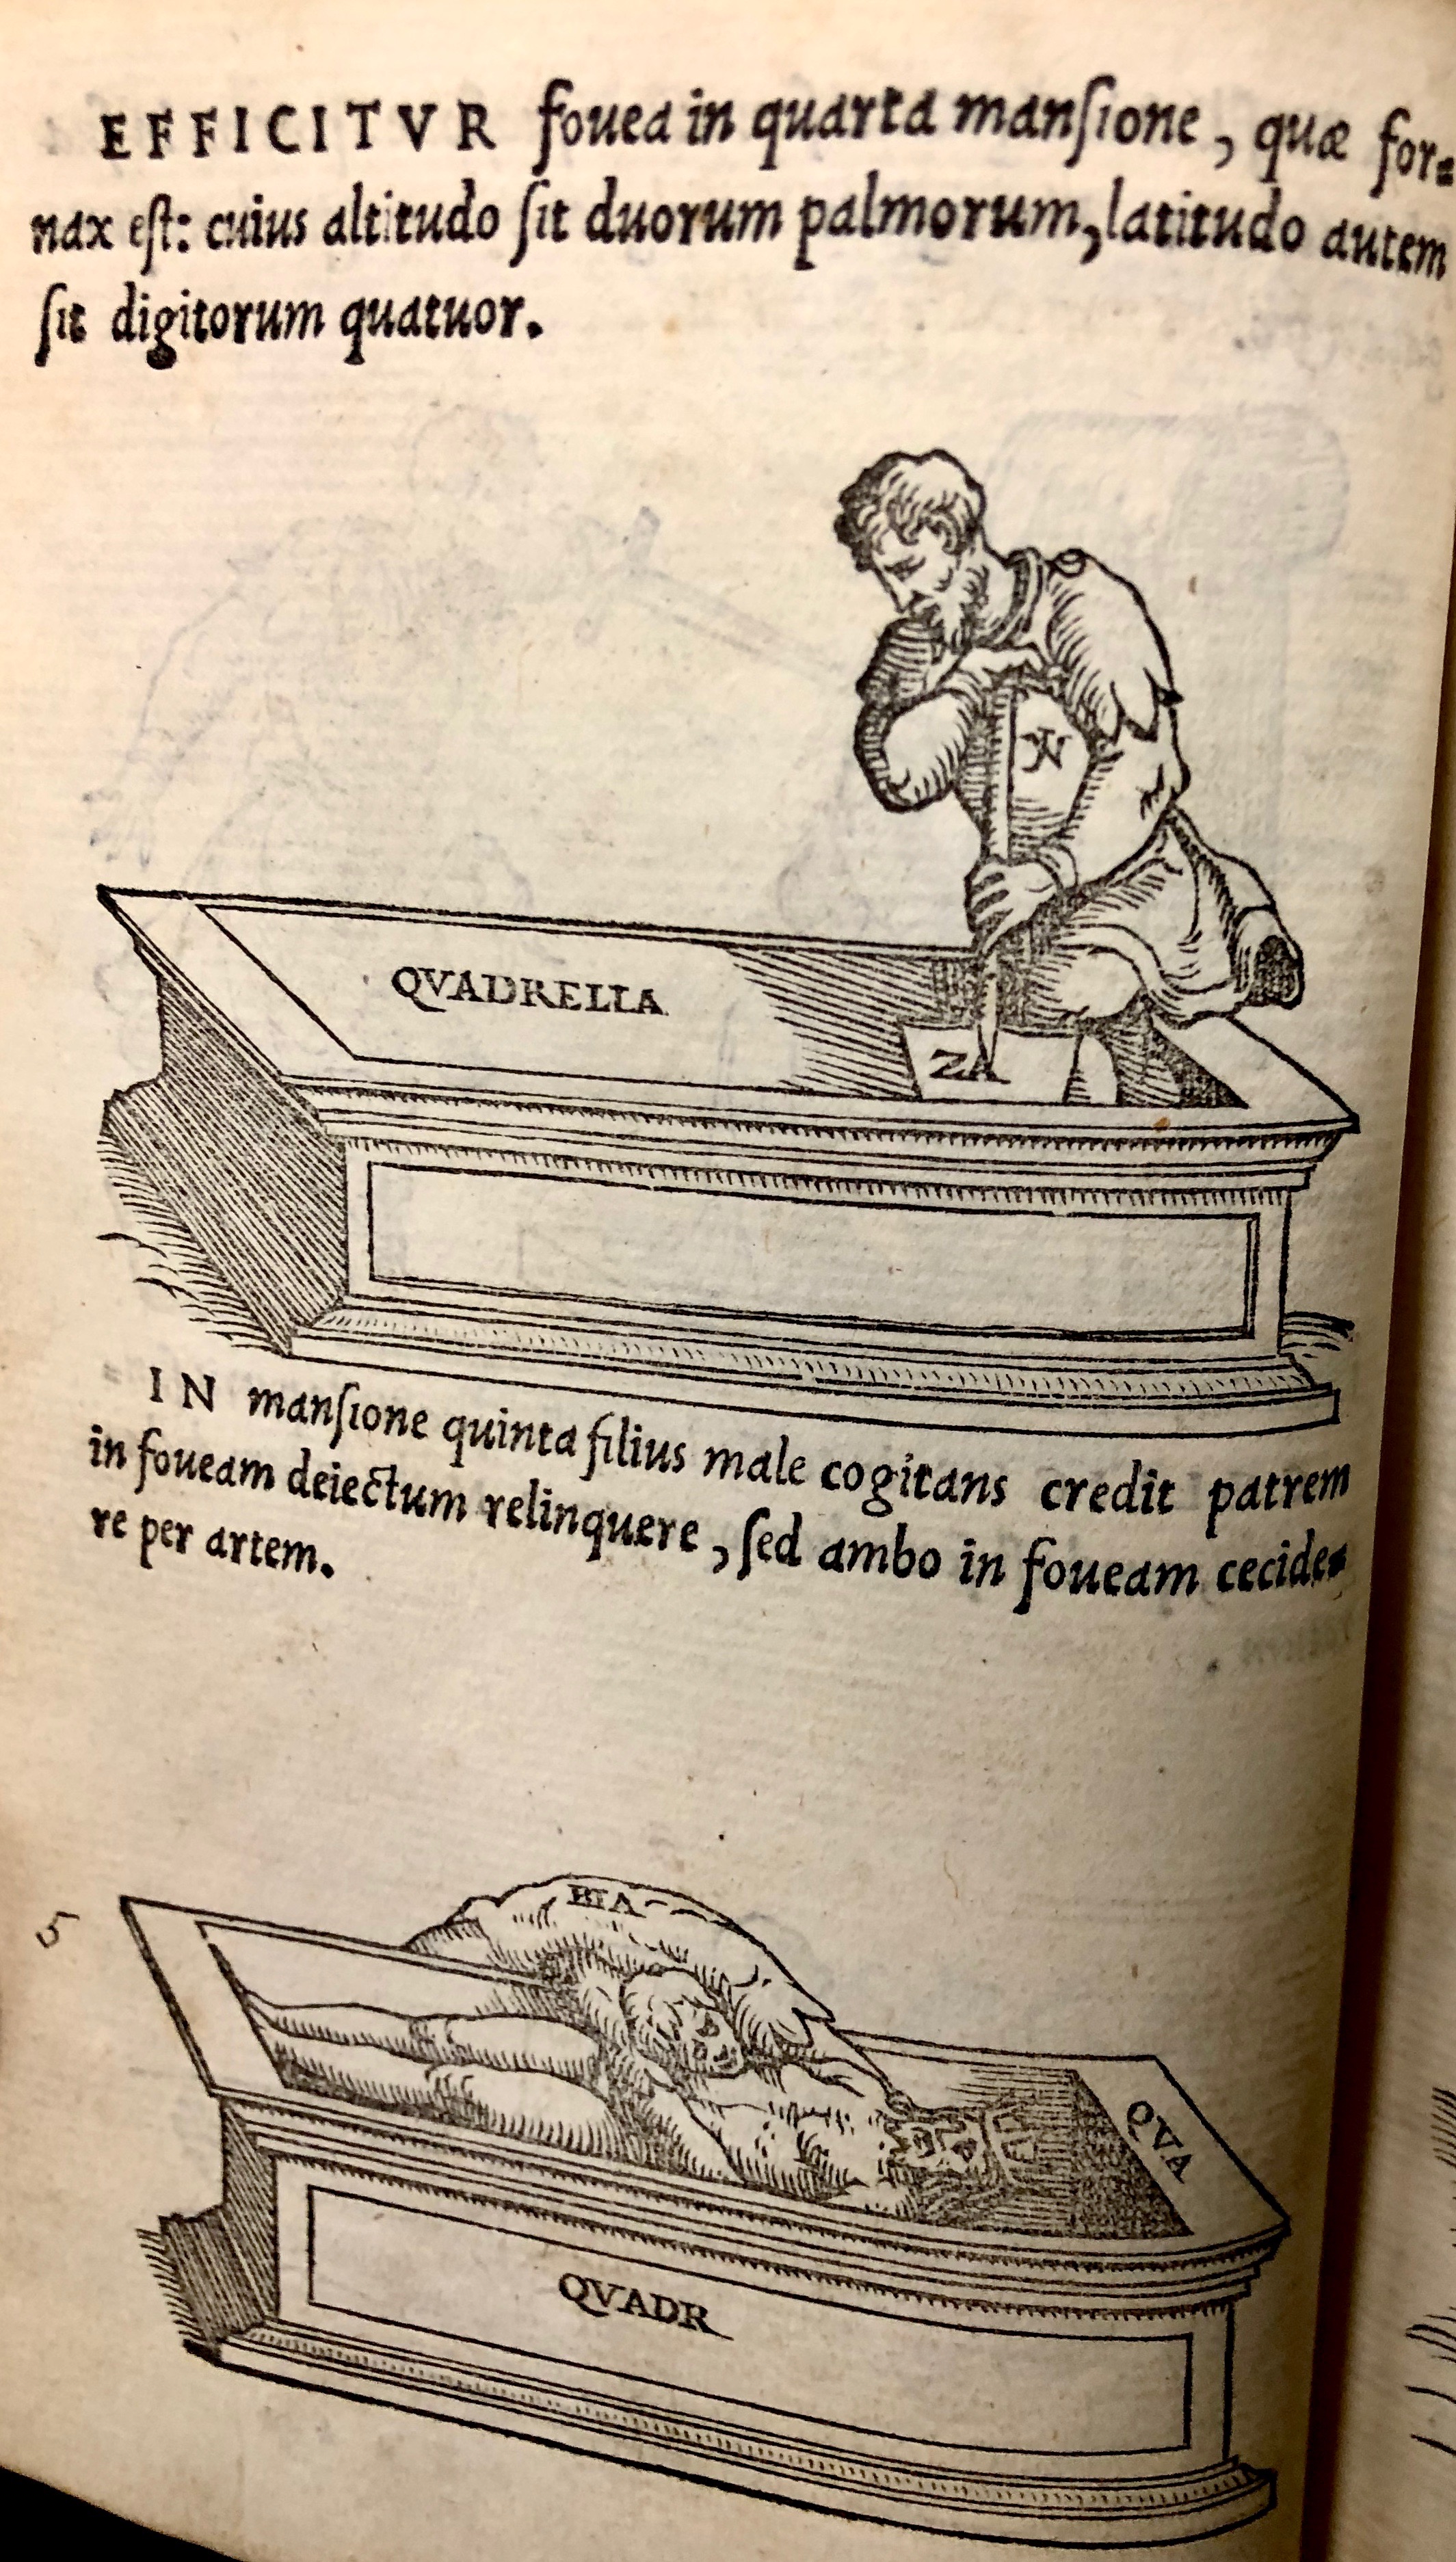 Step four: dig a grave in the furnace room. Step five: the son throws his father, the King, into the grave - but oh no! He falls in too!  From ' Pretiosa margarita : novella de thesauro, ac pretiosissimo philosophorum lapide' by Giano Lacinio, 1546, Venice. (Maddison Collection 2B7, F10528400)